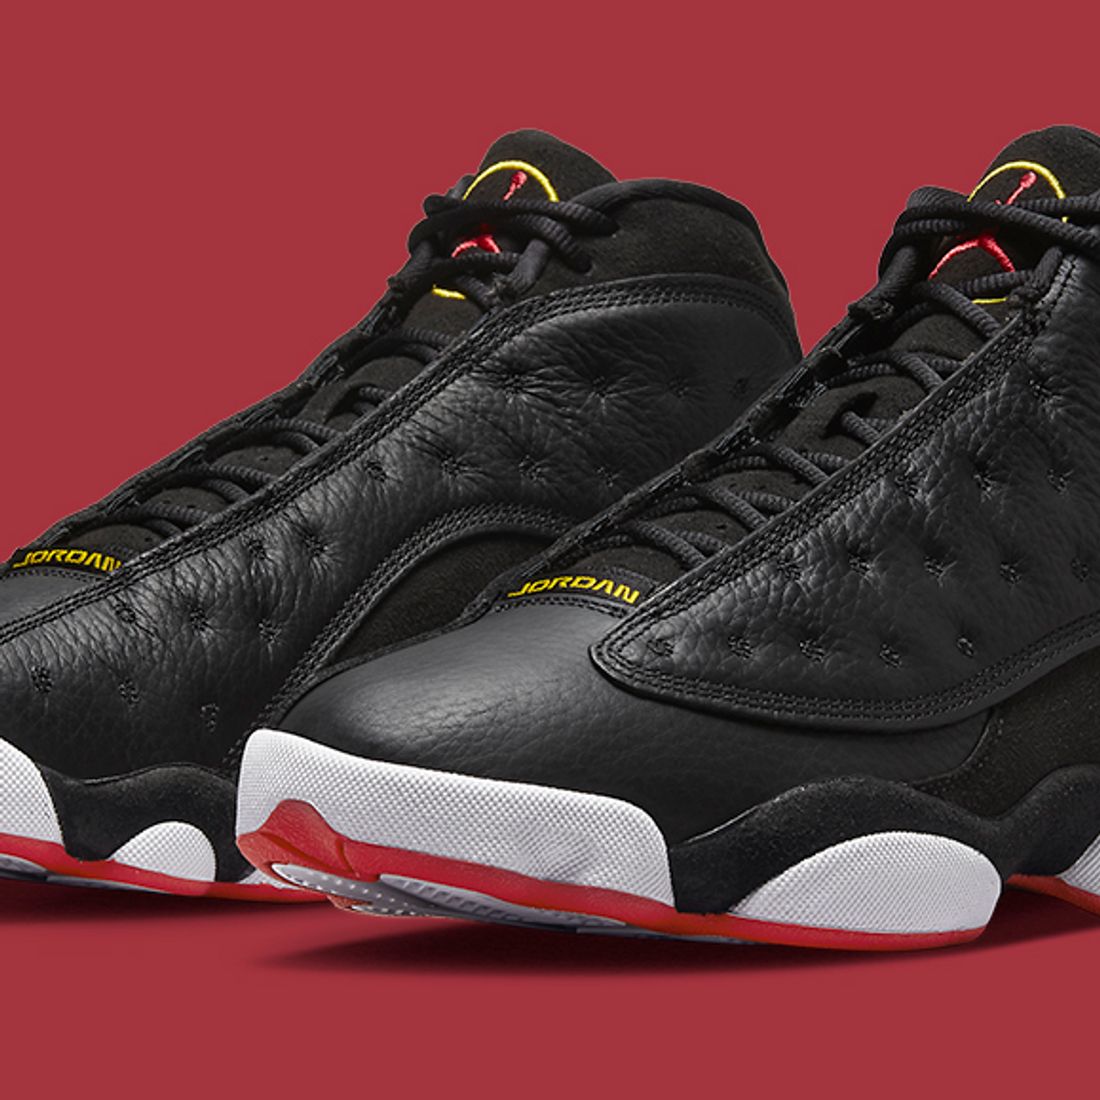 NEW LV Air Jordan 13 Shoes, Sneaker Limited Edition